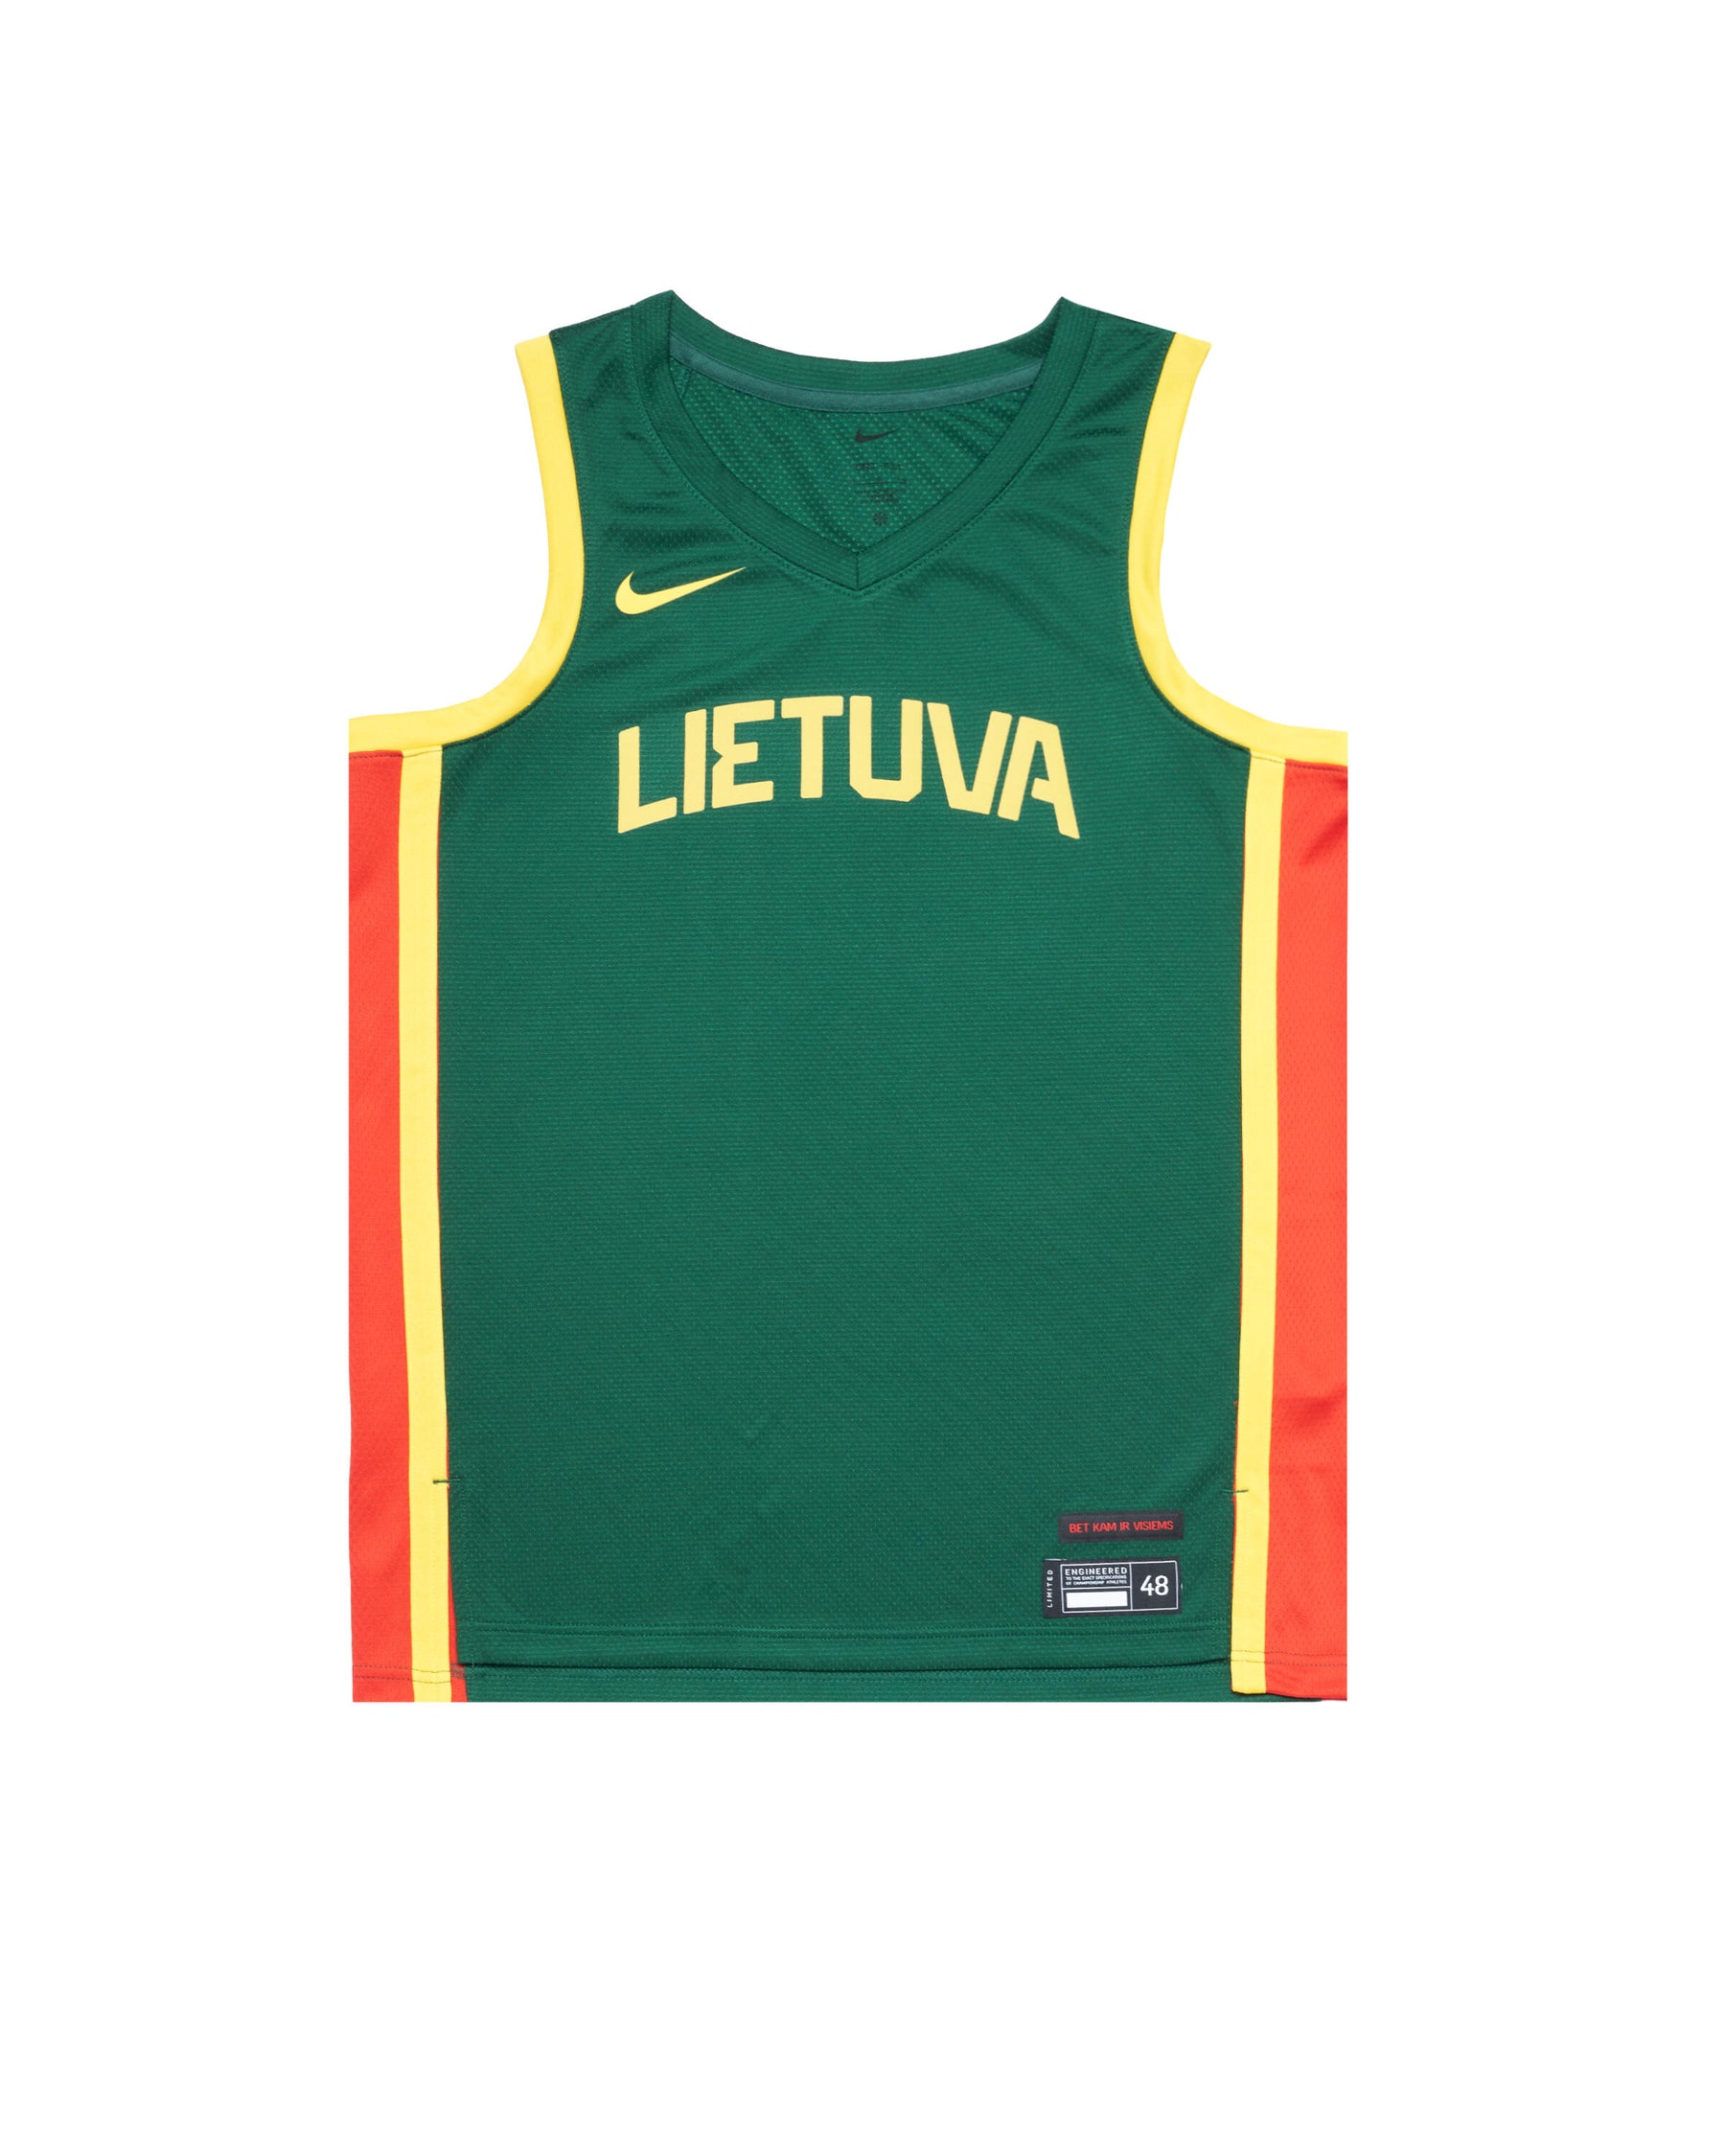 Nike Lithuania LIMITED JERSEY OLYMPIA 24